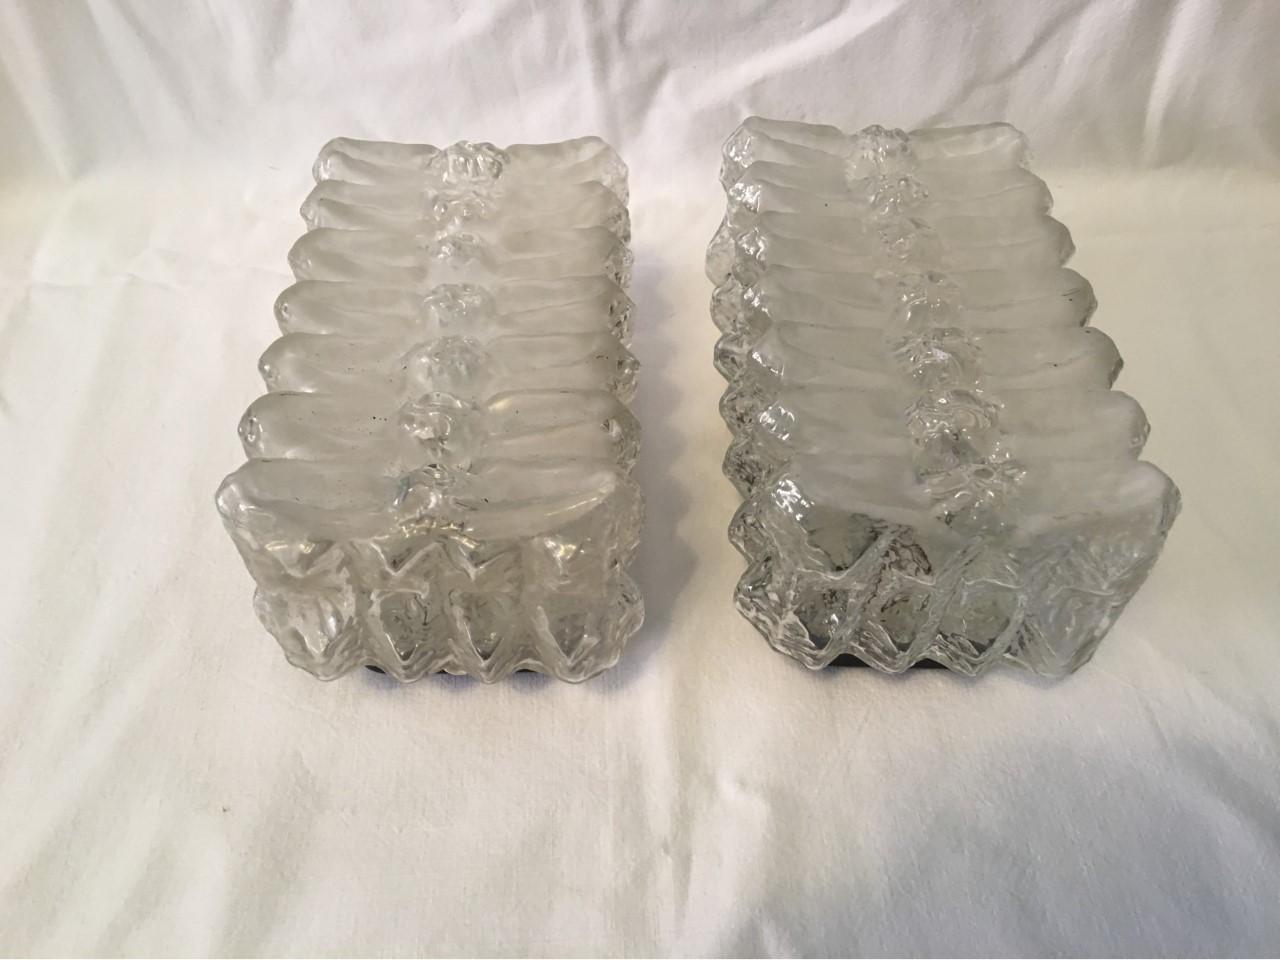 A pair of 1960s wall lamps made with a unique serrated glass pattern (